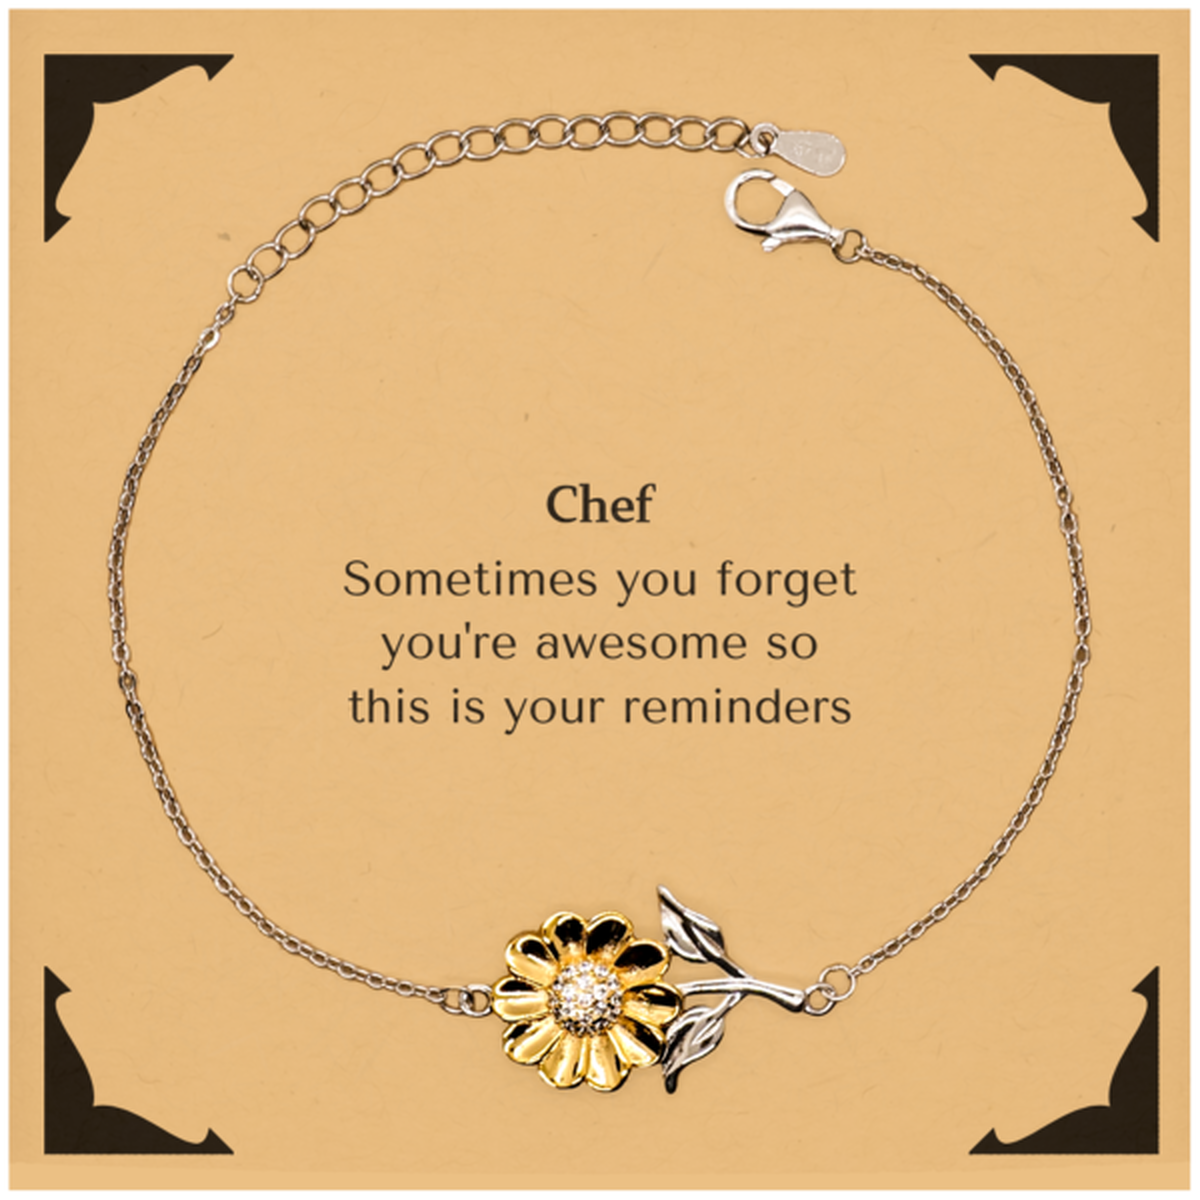 Sentimental Chef Sunflower Bracelet, Chef Sometimes you forget you're awesome so this is your reminders, Graduation Christmas Birthday Gifts for Chef, Men, Women, Coworkers